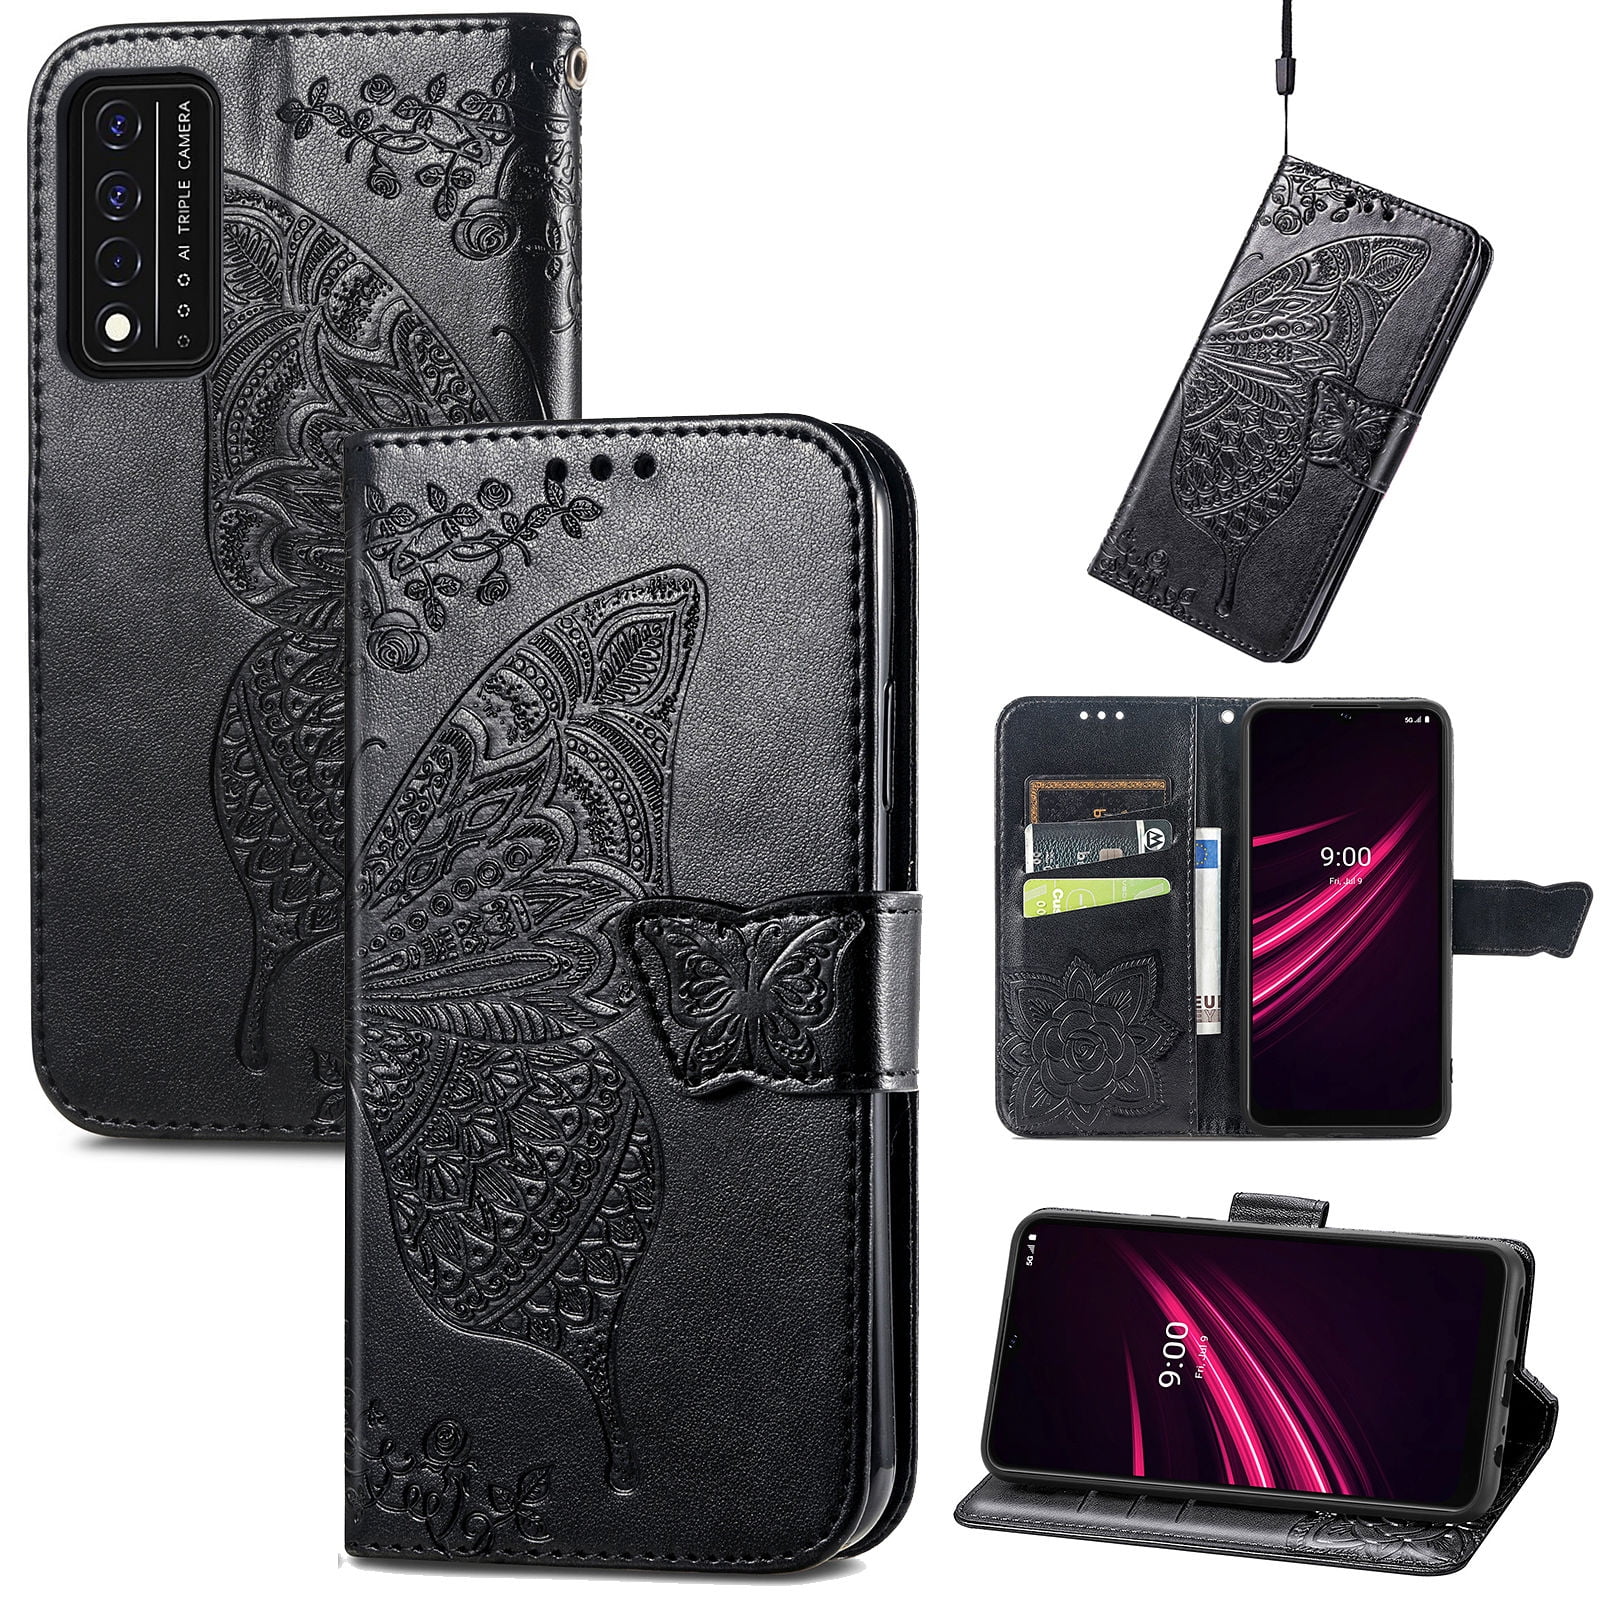 Techcircle T-Mobile Revvl V+ 5G Case, PU Leather TPU Wallet Cover with Card Holder Kickstand Hidden Magnetic Adsorption Shockproof Flip Folio Cell Phone Case for